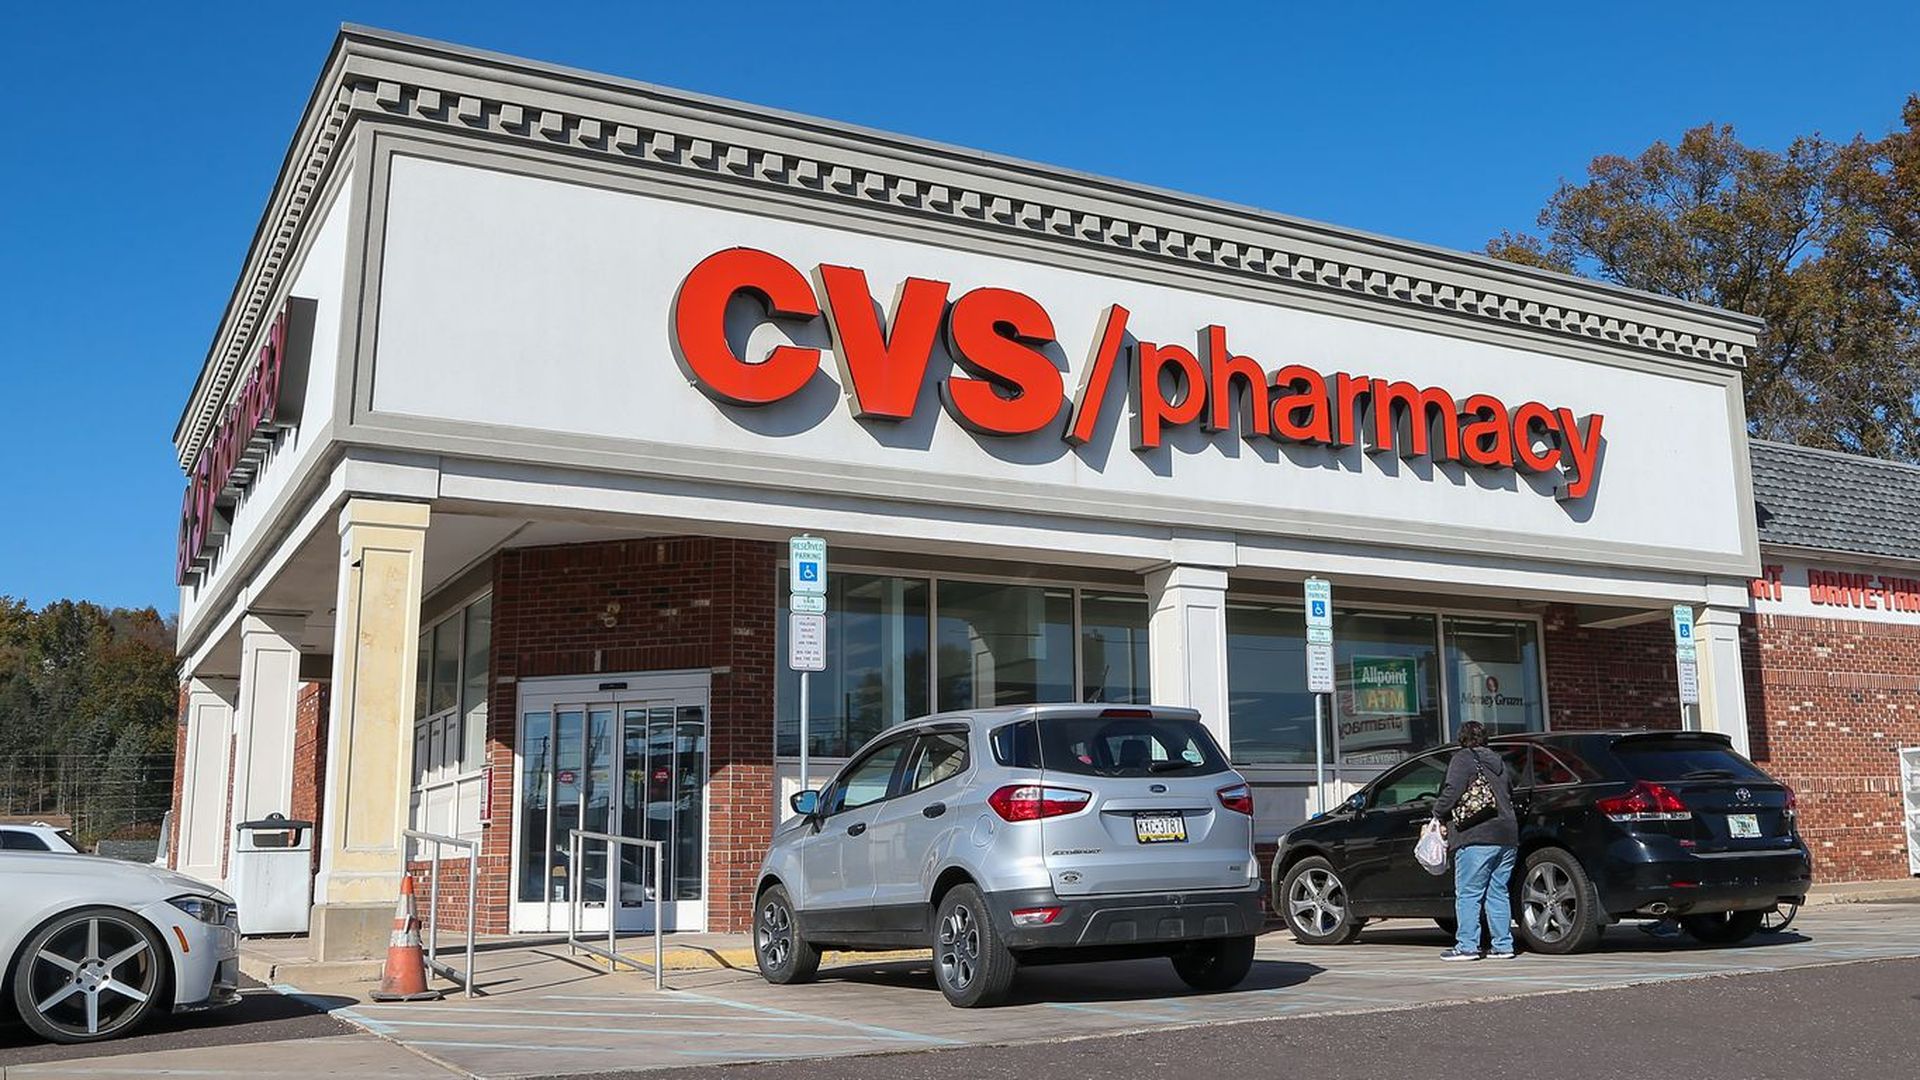 CVS, Walgreens, Walmart ordered to pay $650 million in Ohio